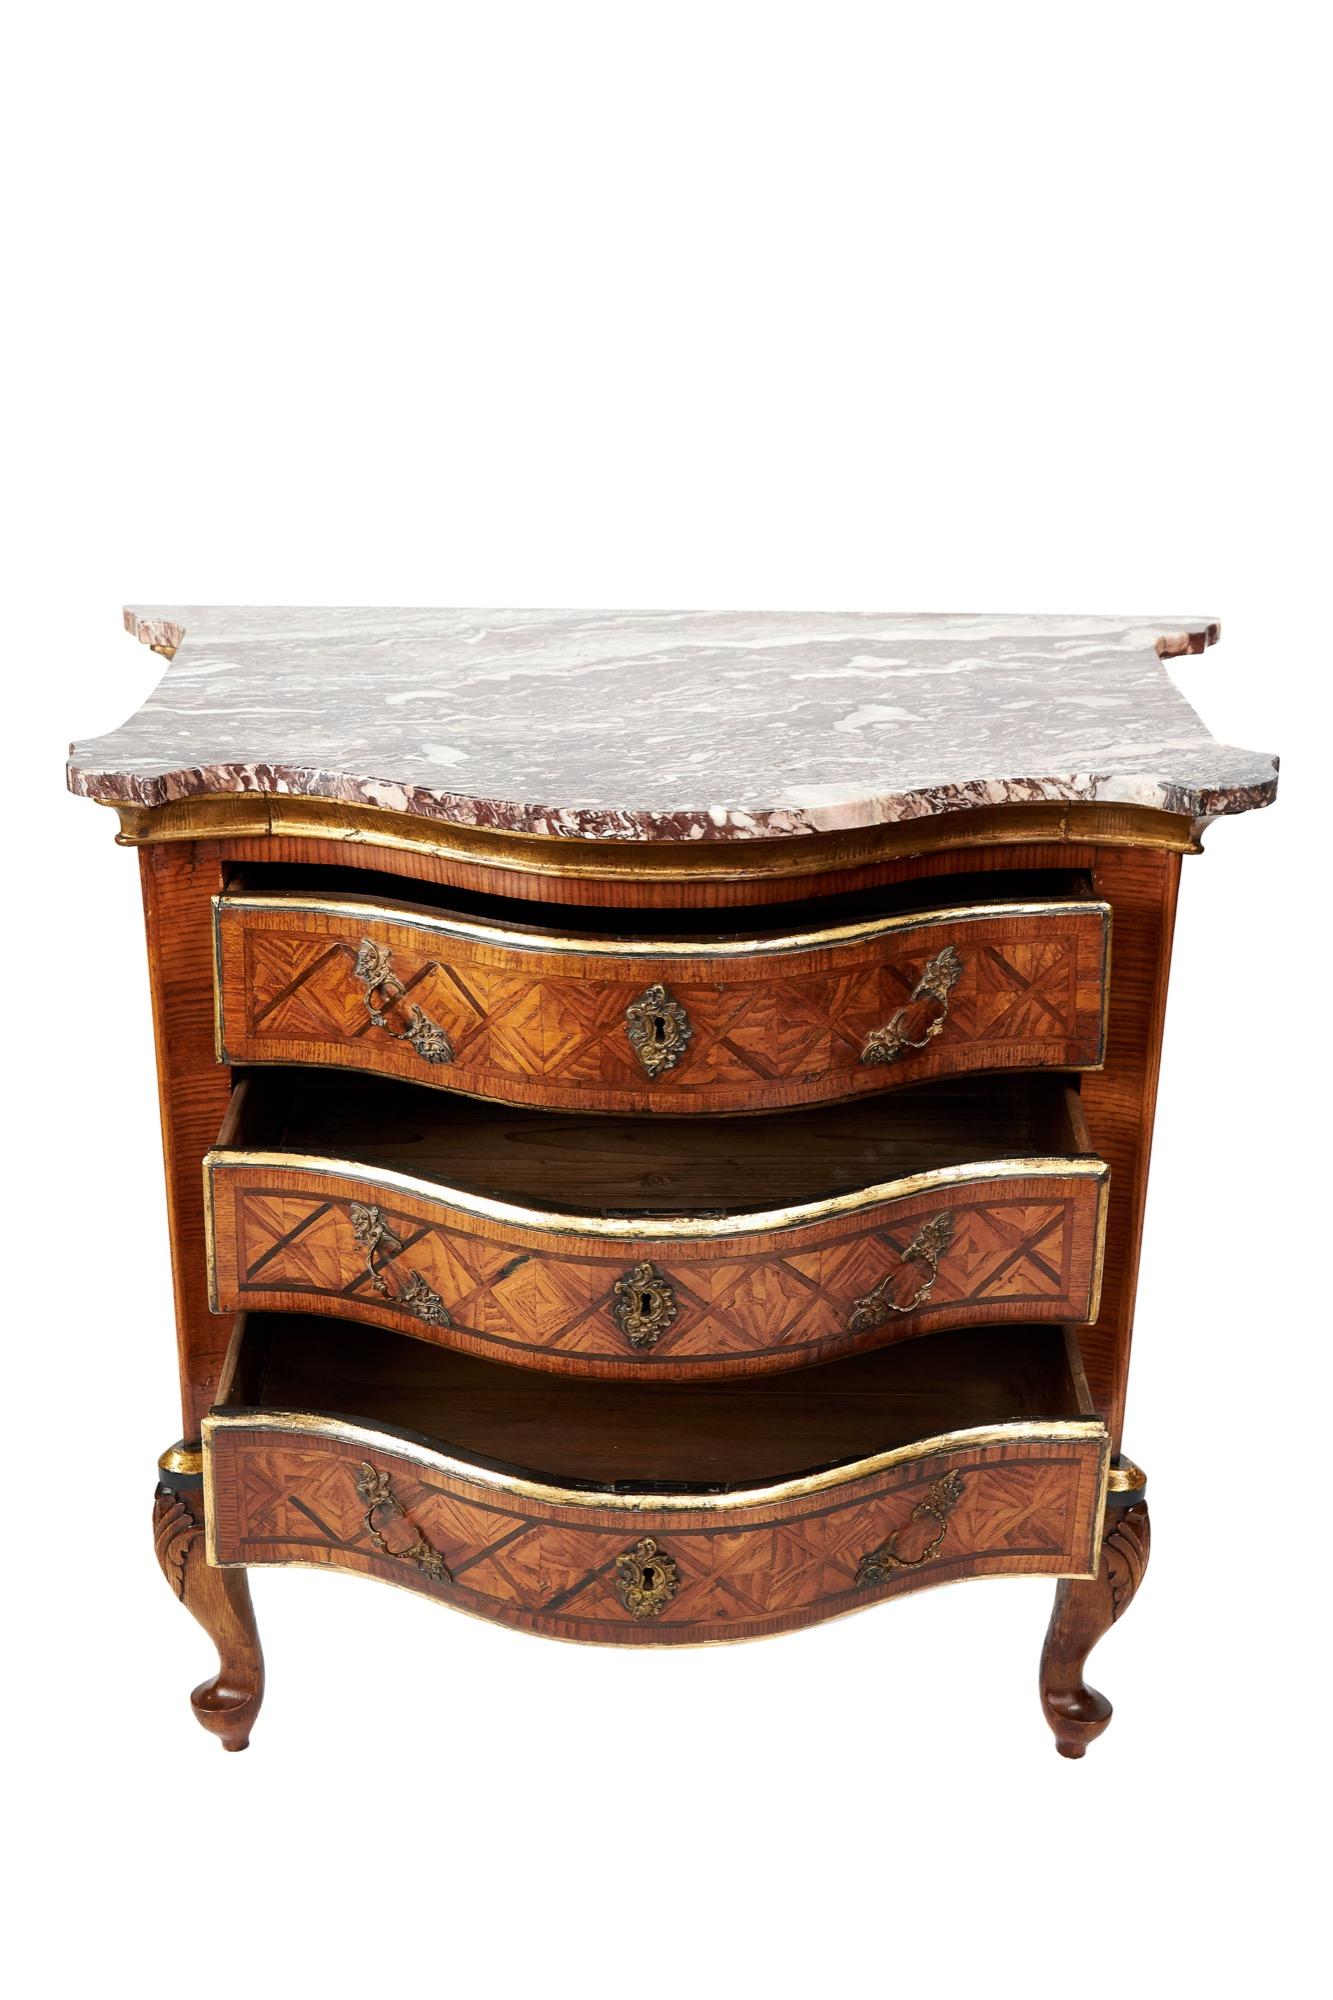 Antique French 19th Century Oak Inlaid Parquetry Commode Chest In Excellent Condition For Sale In Suffolk, GB